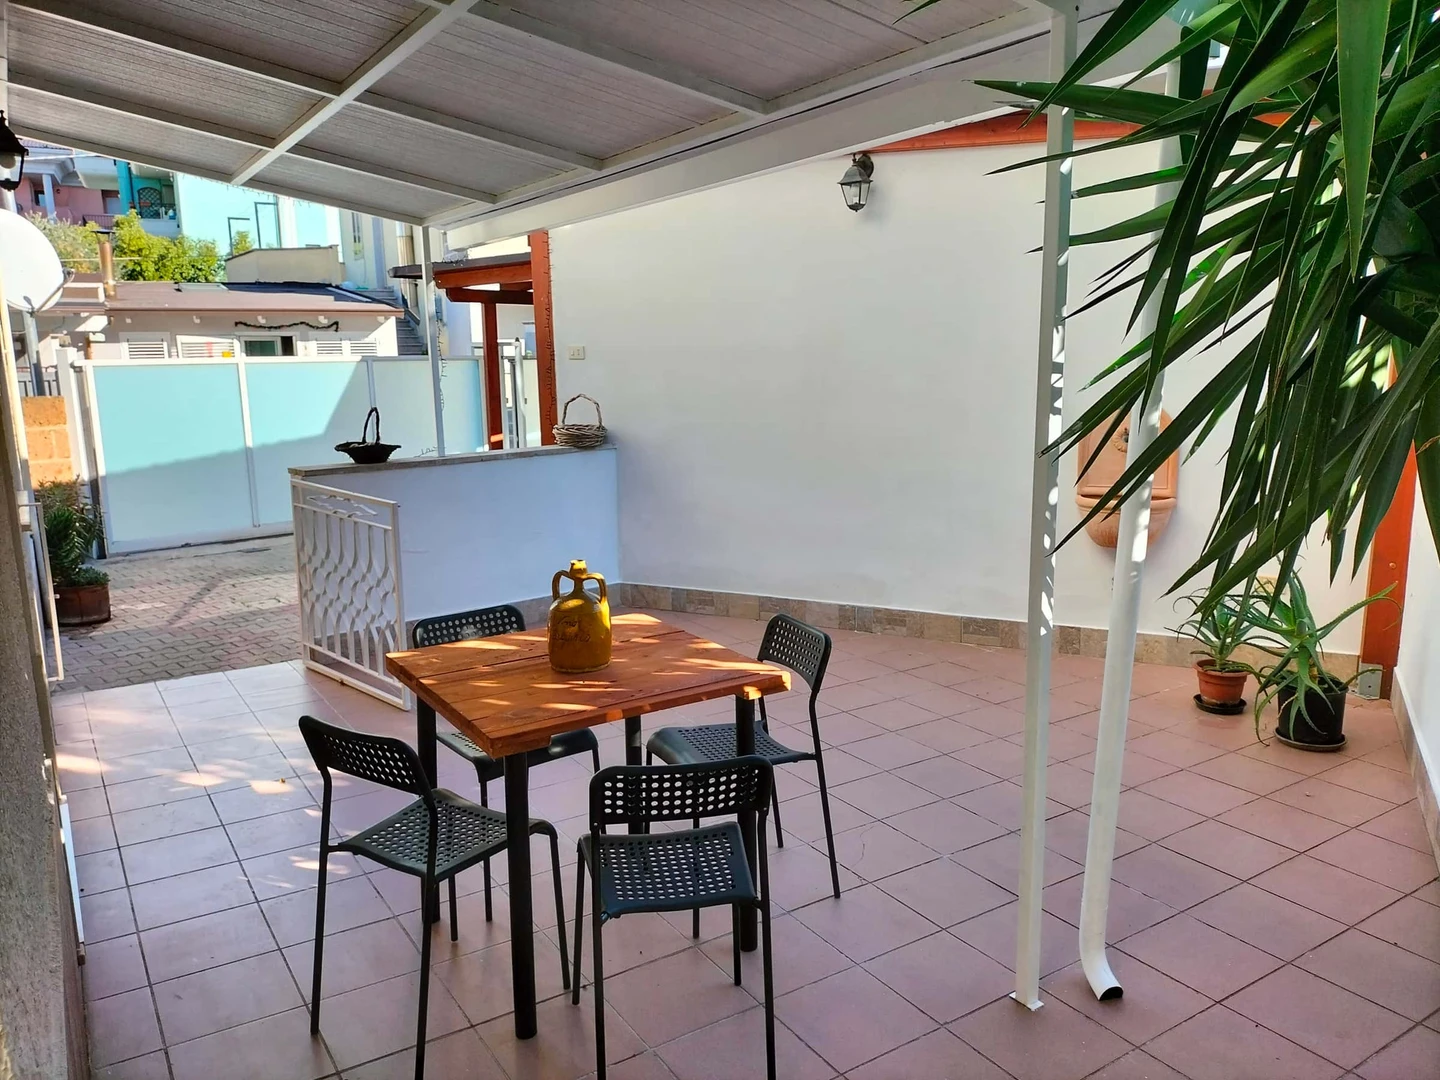 Accommodation in the centre of Pescara